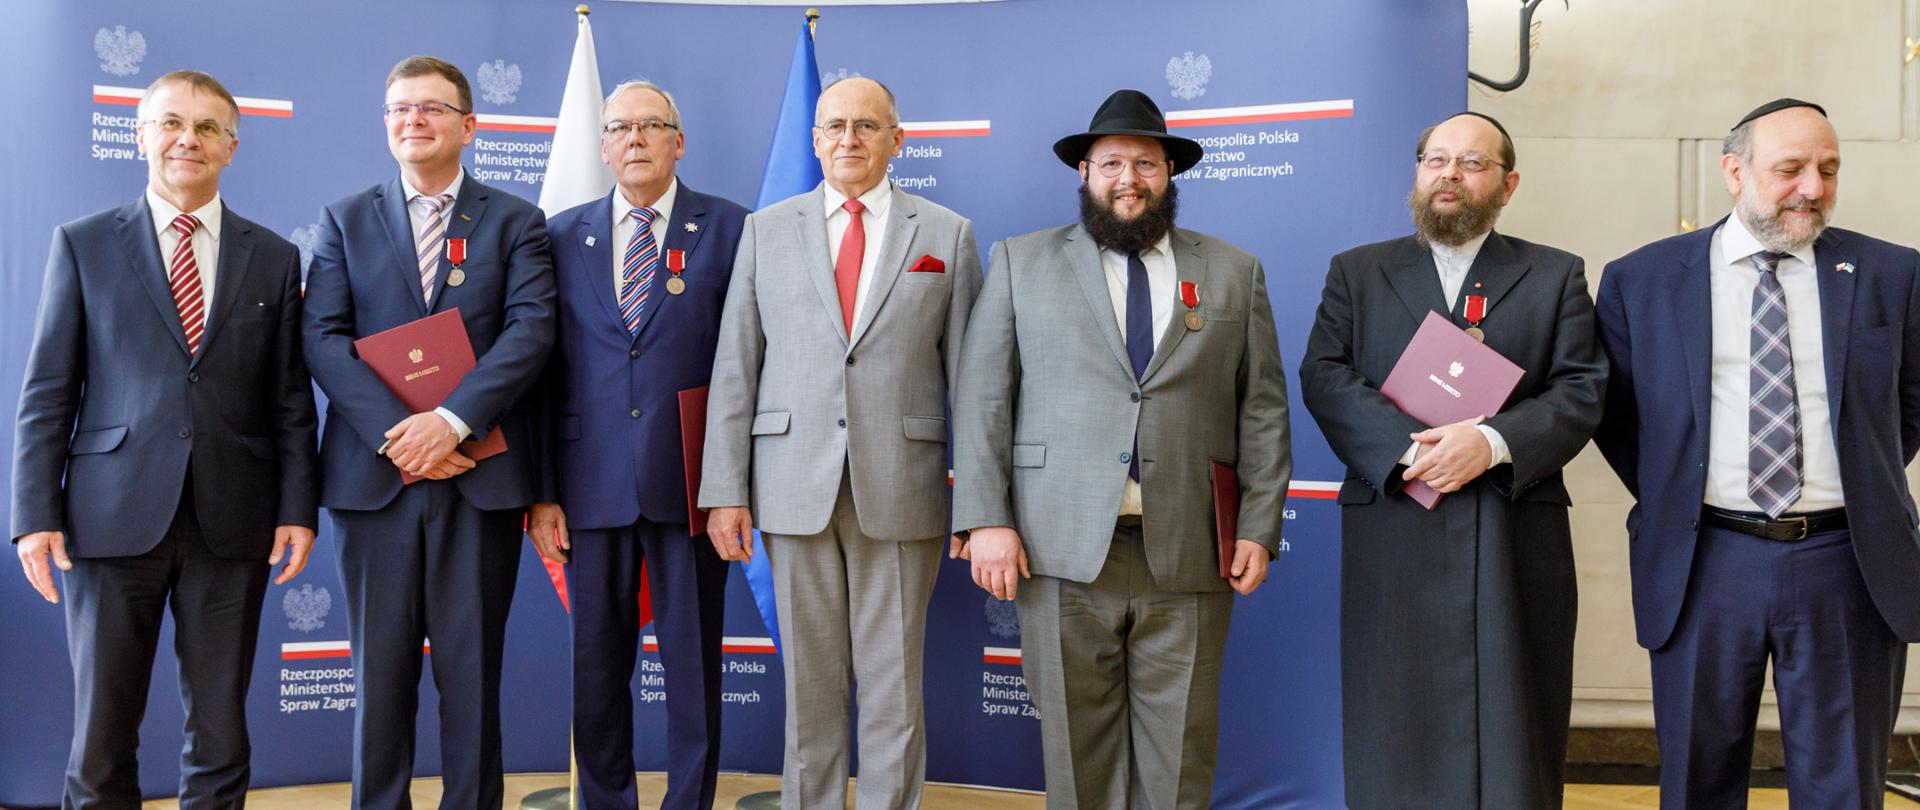 Minister Zbigniew Rau presented the Bene Merito Honorary Badges to animators of contemporary socio-cultural and religious Jewish life in Poland